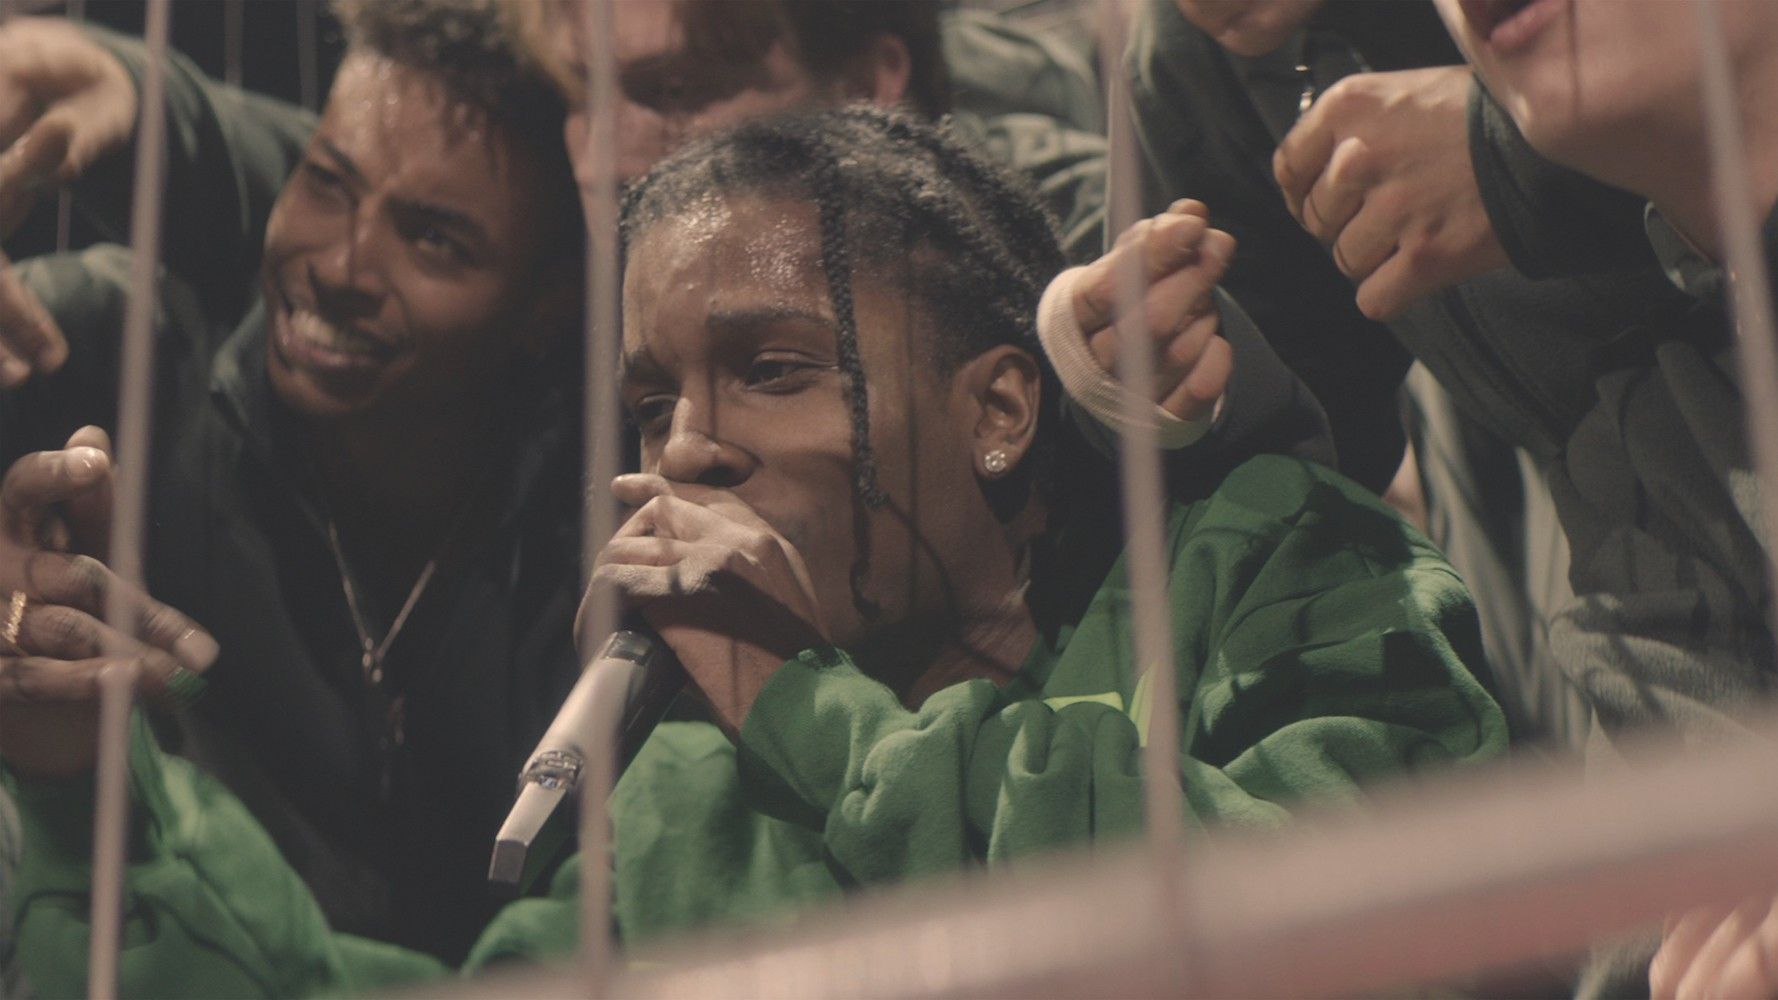 Watch ASAP Rocky's First Show Since Being Released from Jail